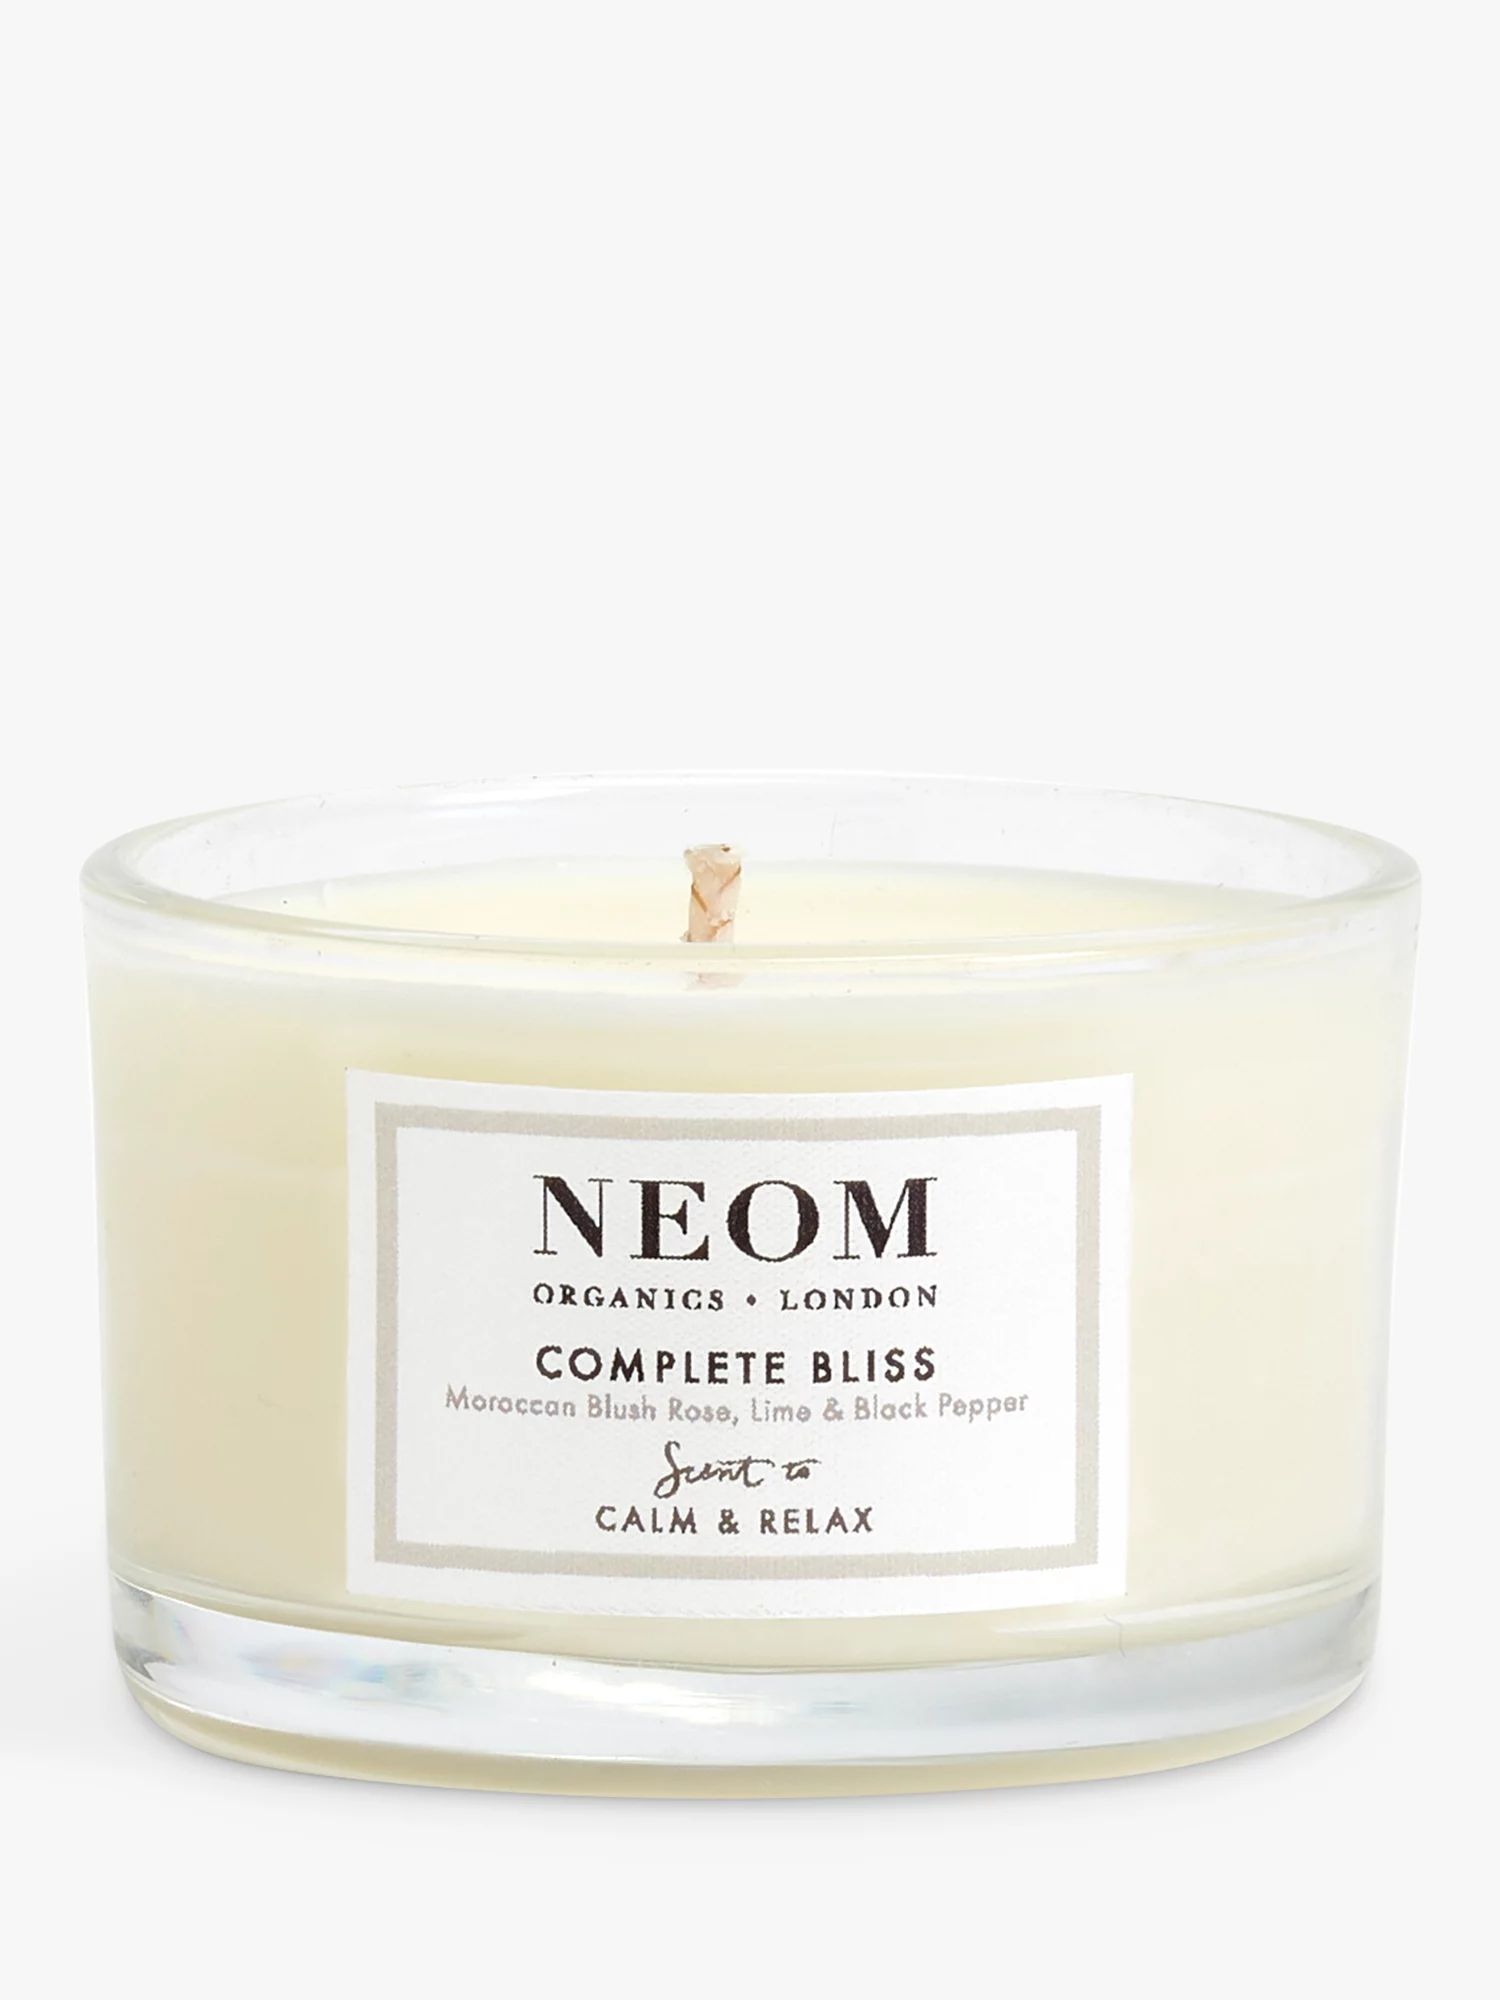 Neom Organics London Complete Bliss Travel Scented Candle | John Lewis (UK)